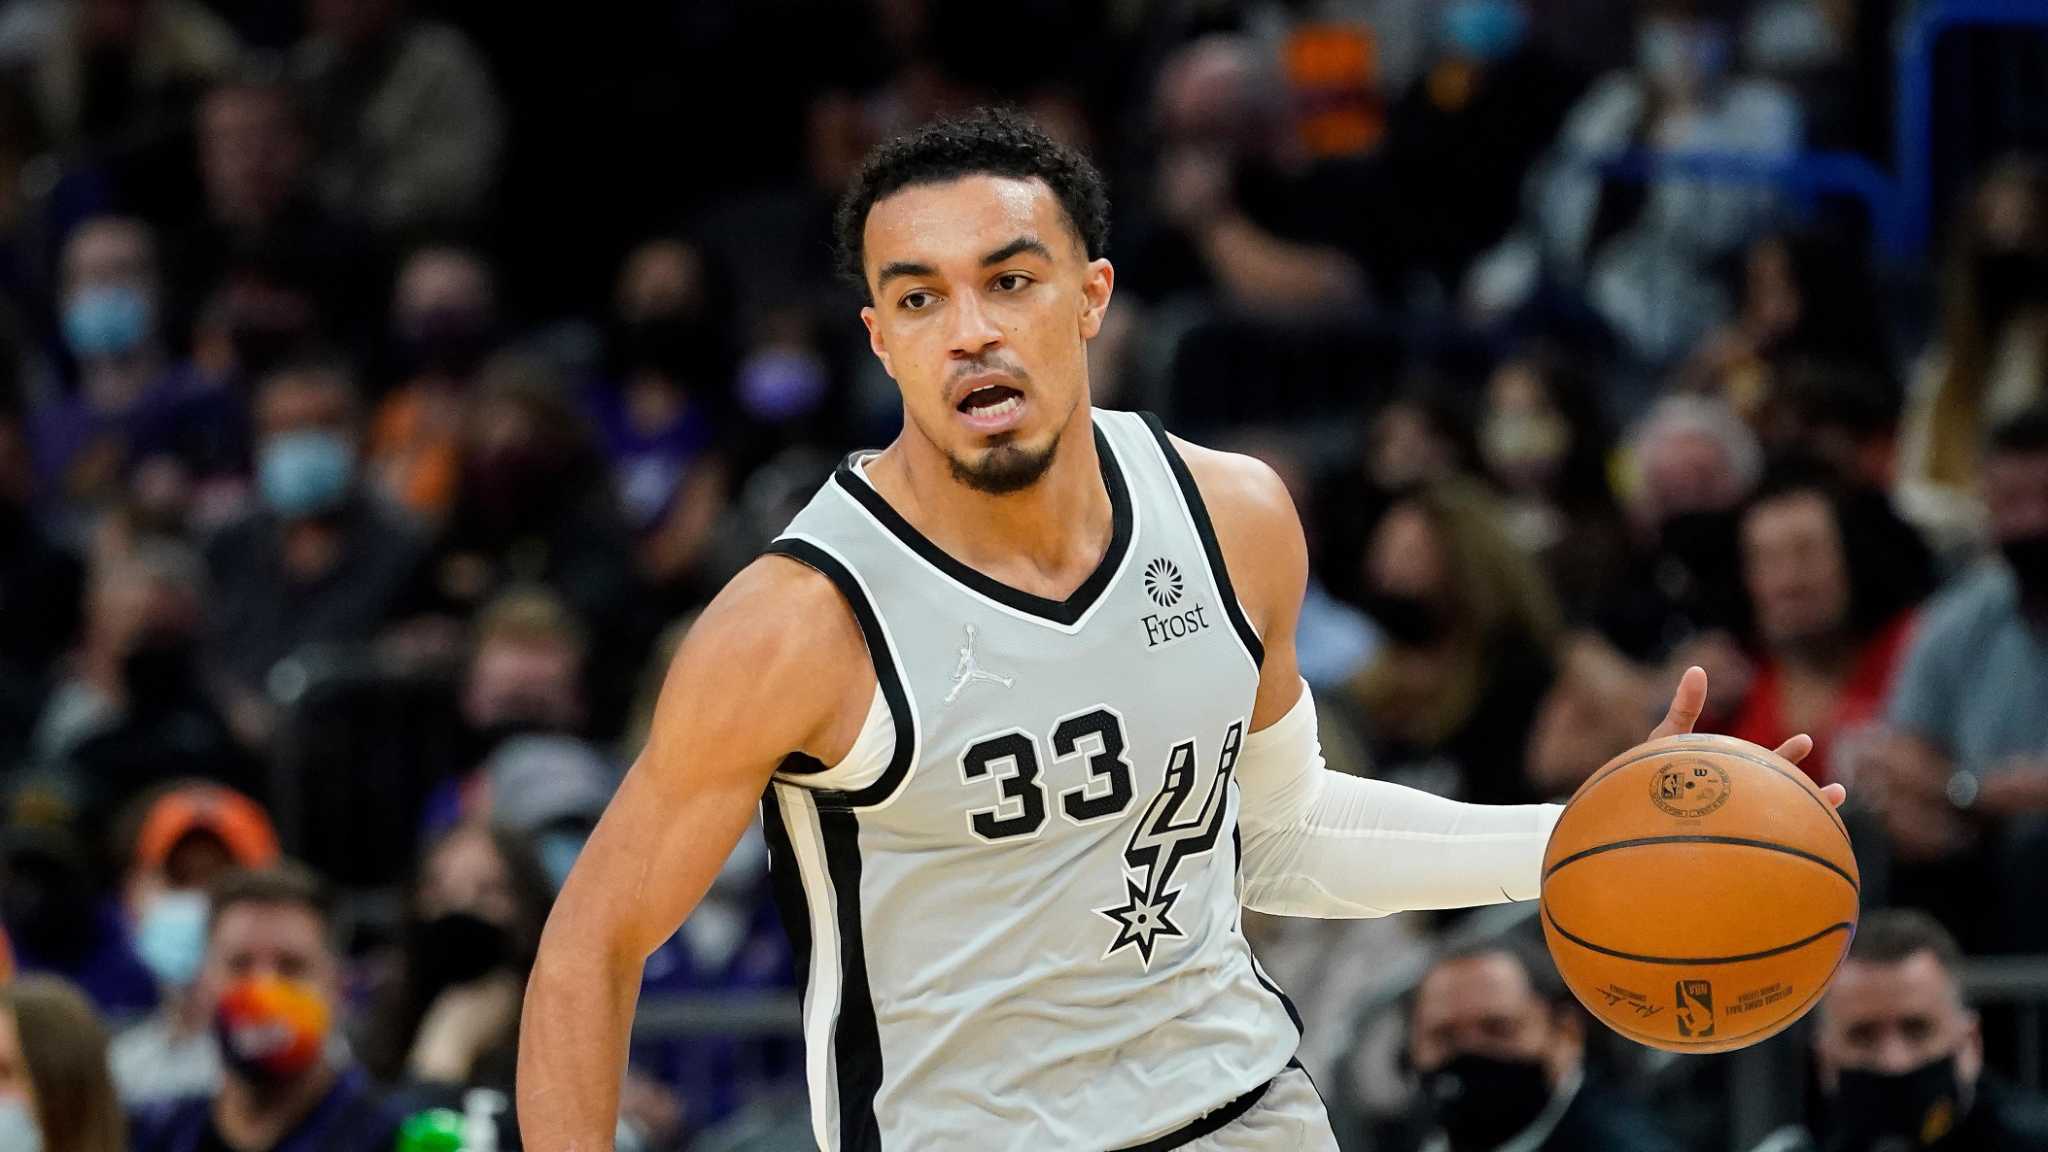 After star is traded, Apple Valley's Tre Jones gets expanded role with Spurs